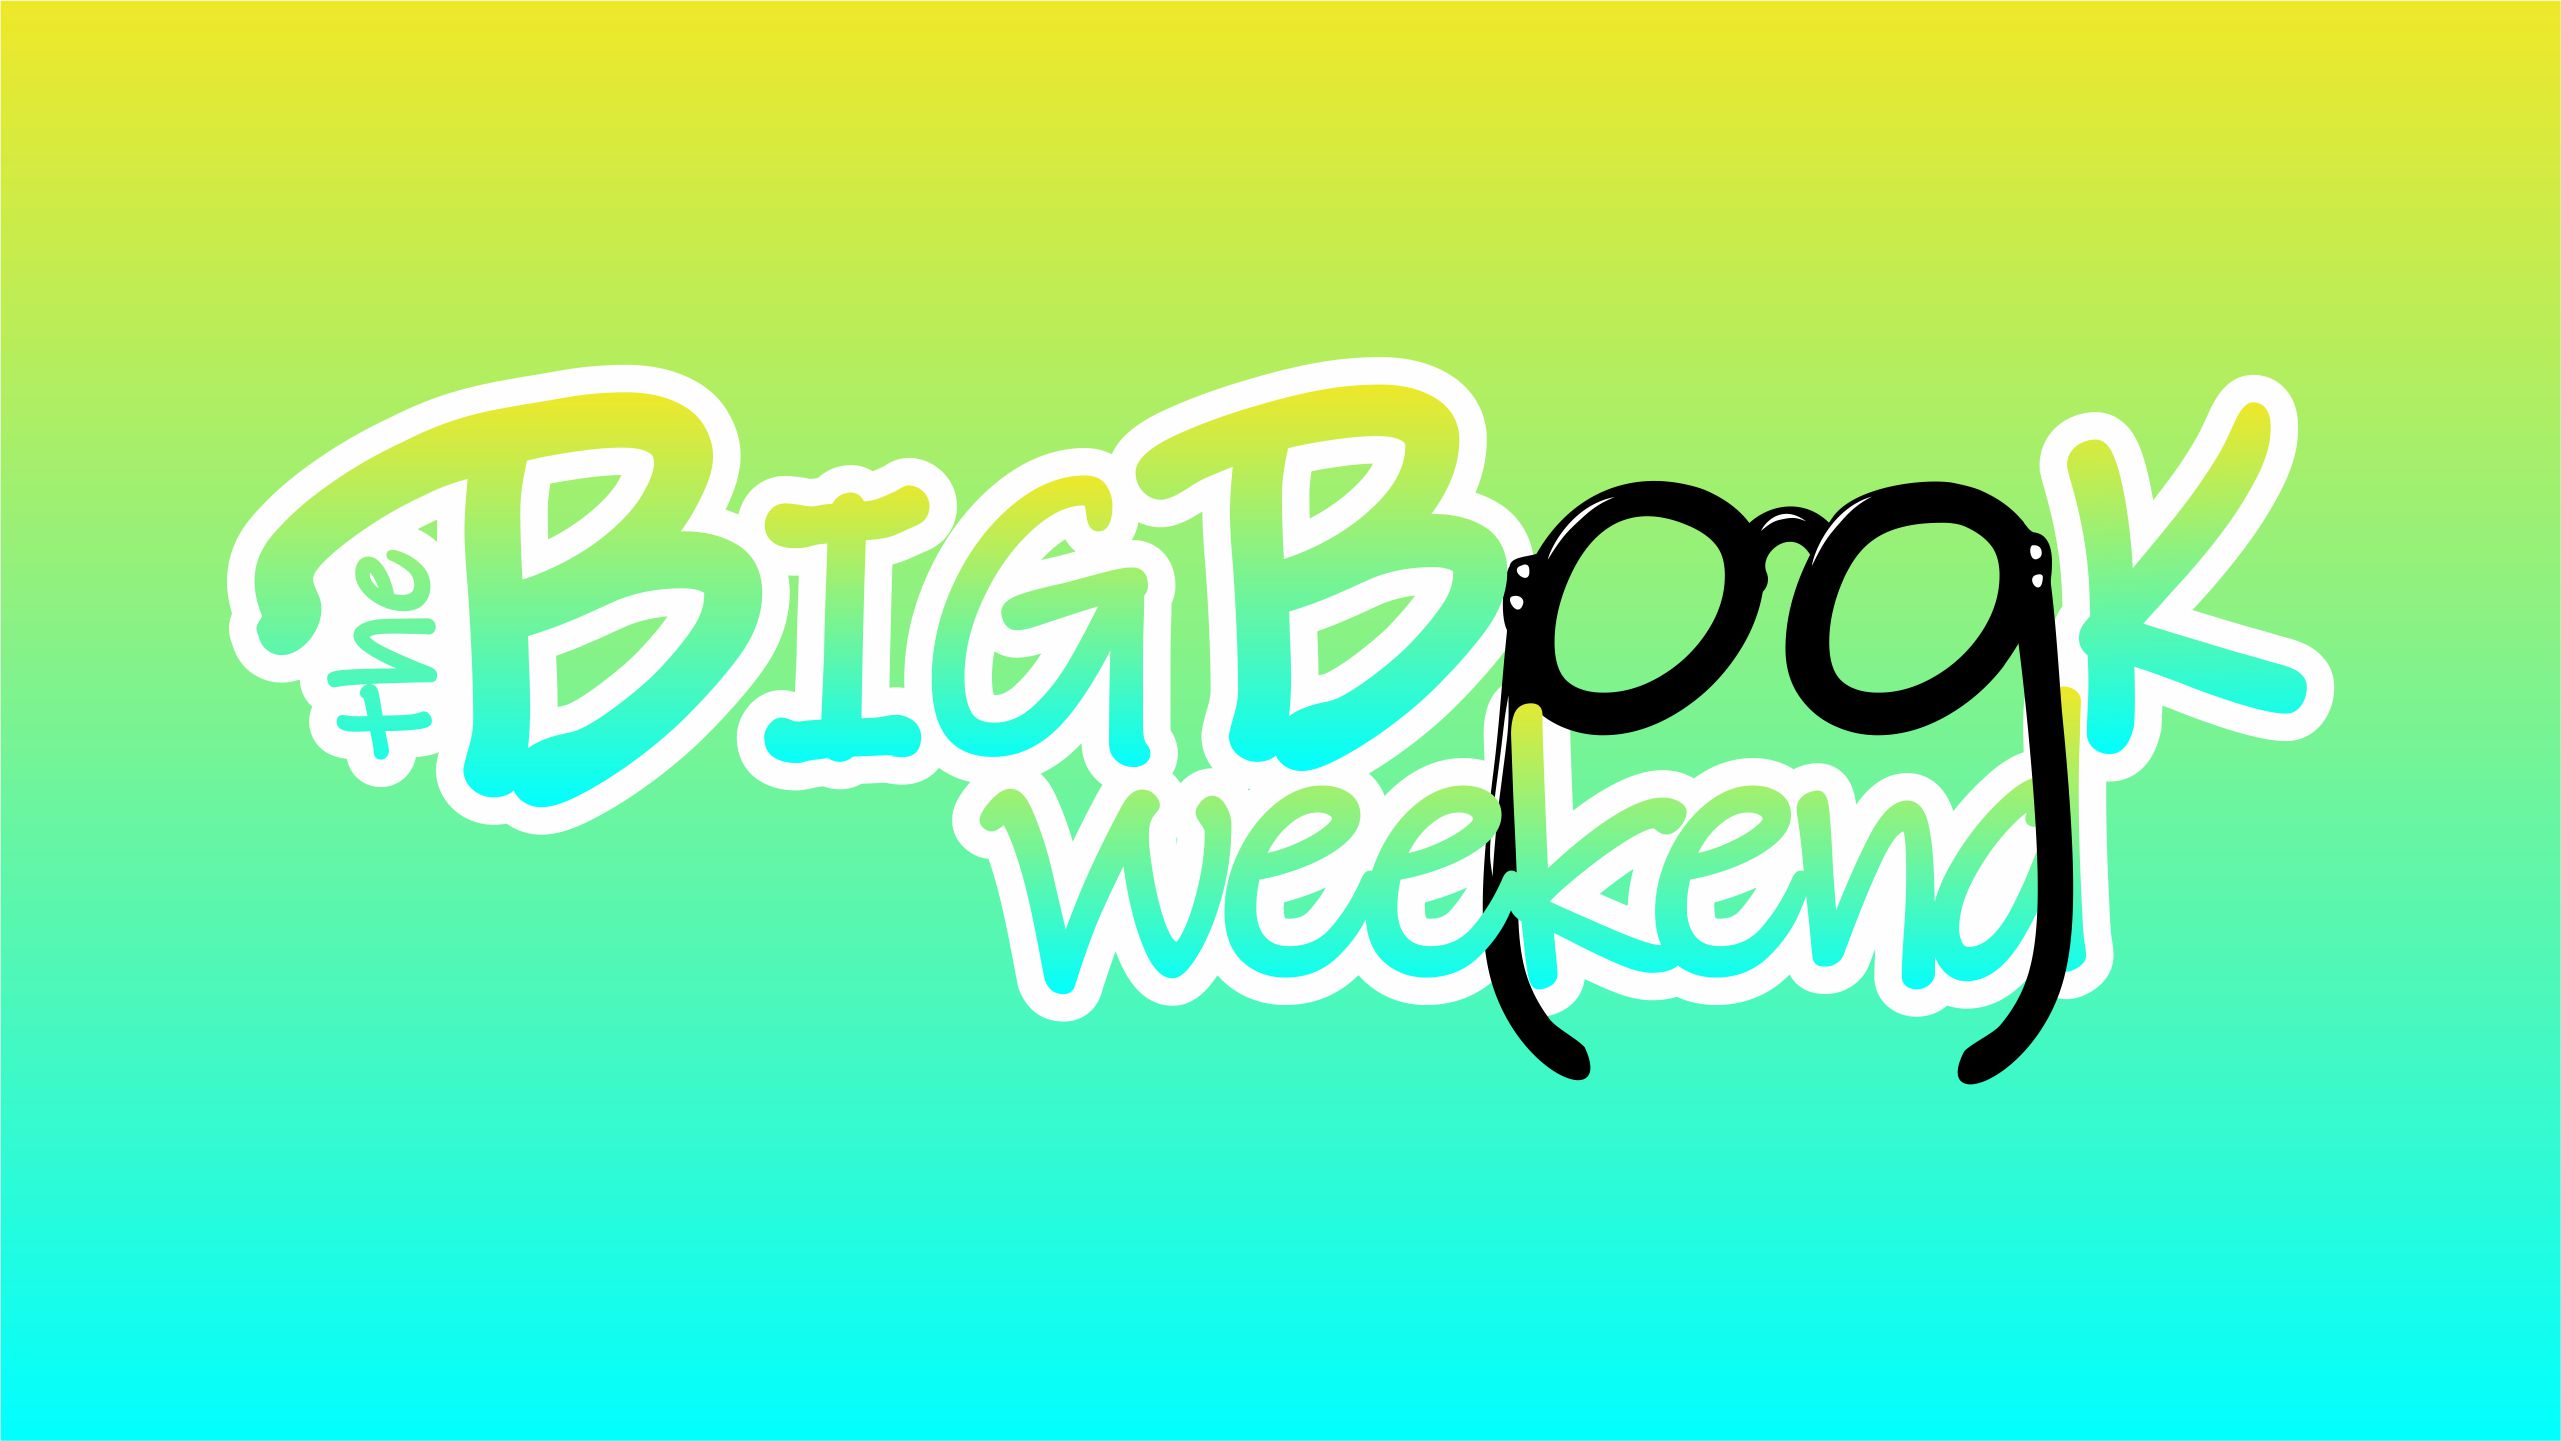 The Big Book Weekend has been co-founded by Kit de Waal and Molly Flatt.